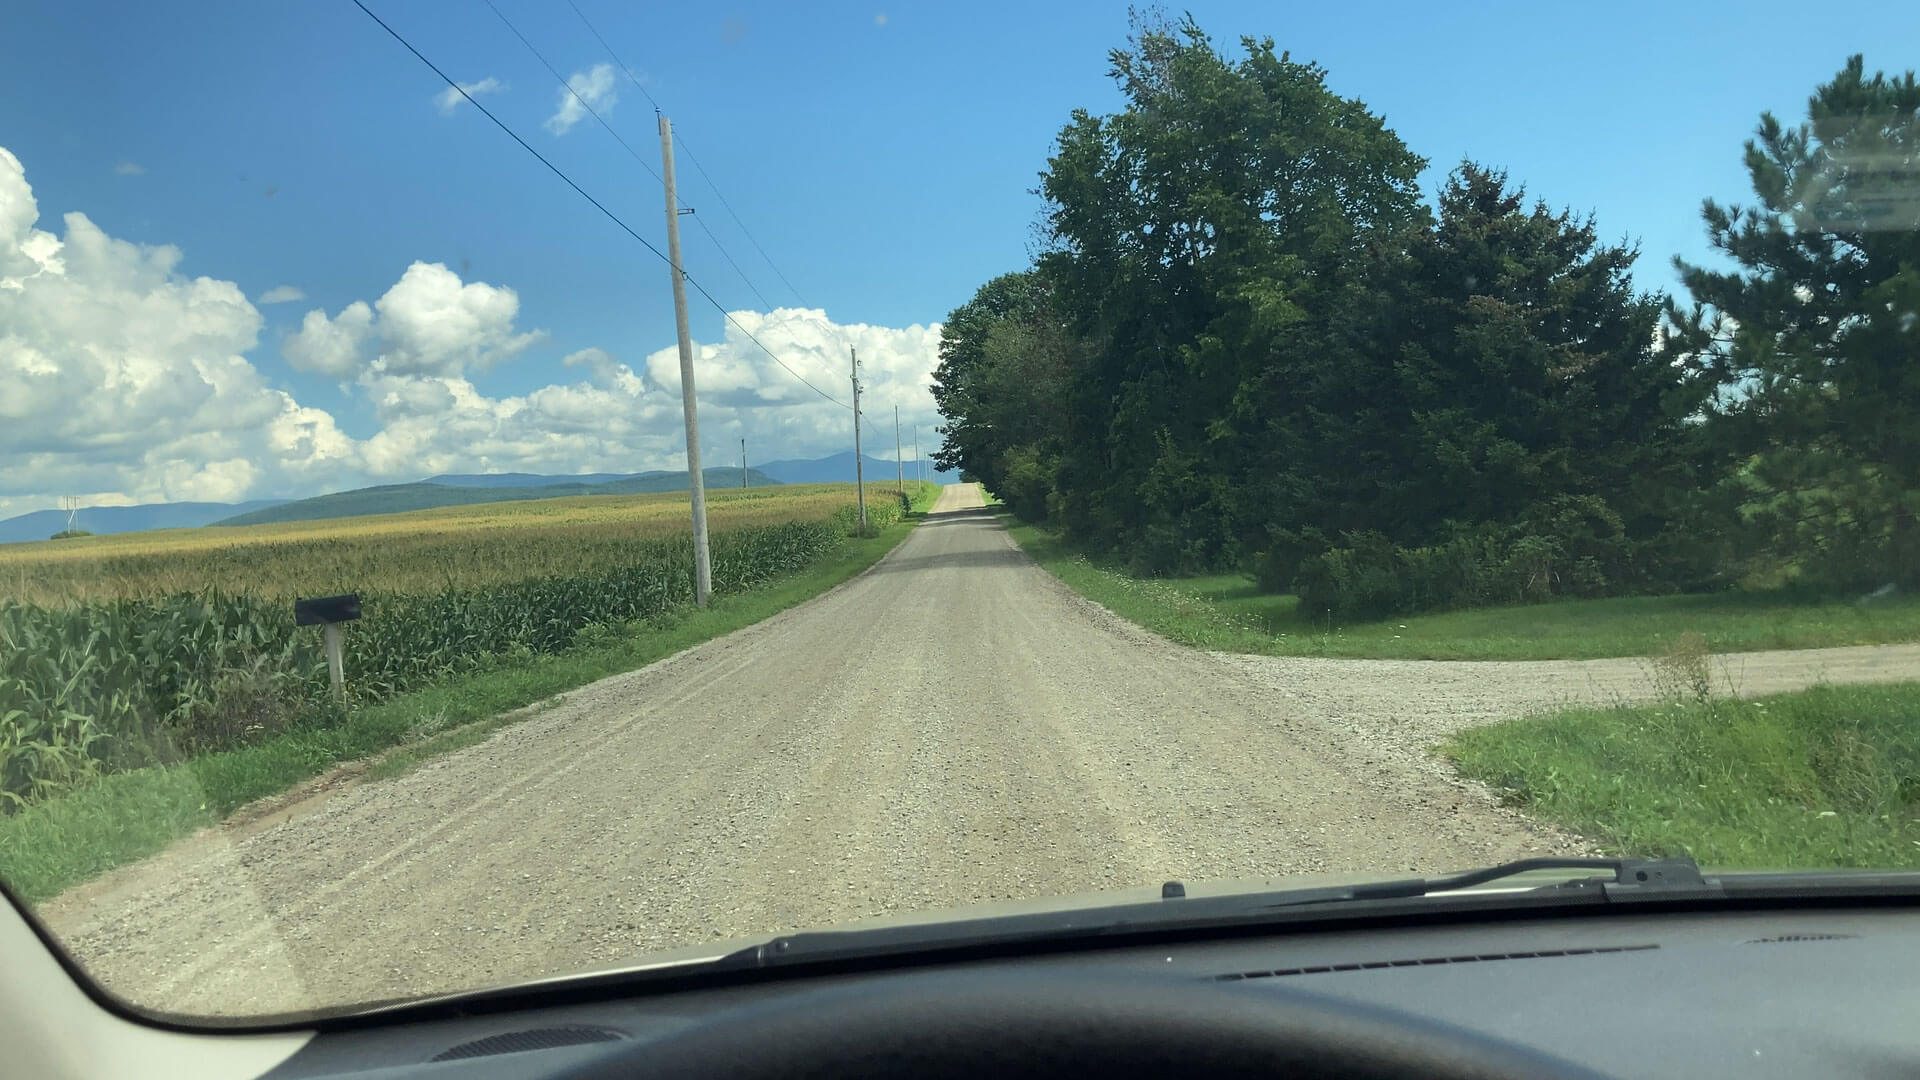 View of a gravel road stretching away from the lens from inside a car with the top of the steering wheel grazing the bottom edge of the frame. There is a cornfield on the left side of the road and trees full of dark green leaves on the right. It's a sunny day with a bright blue sky with some white clouds sweeping to the left of the frame.